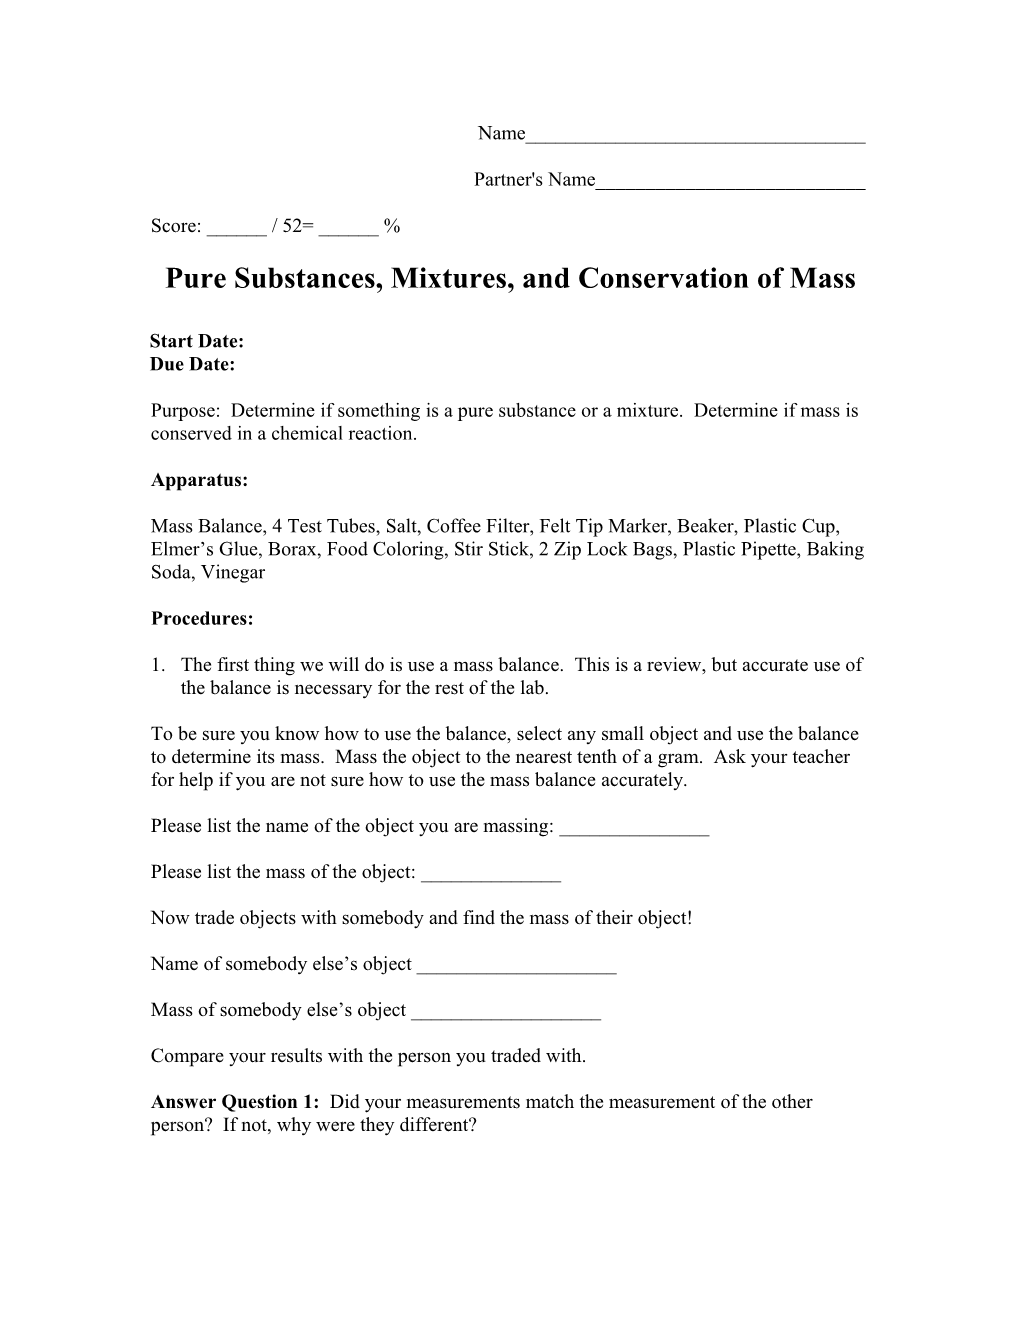 Pure Substances, Mixtures, and Conservation of Mass